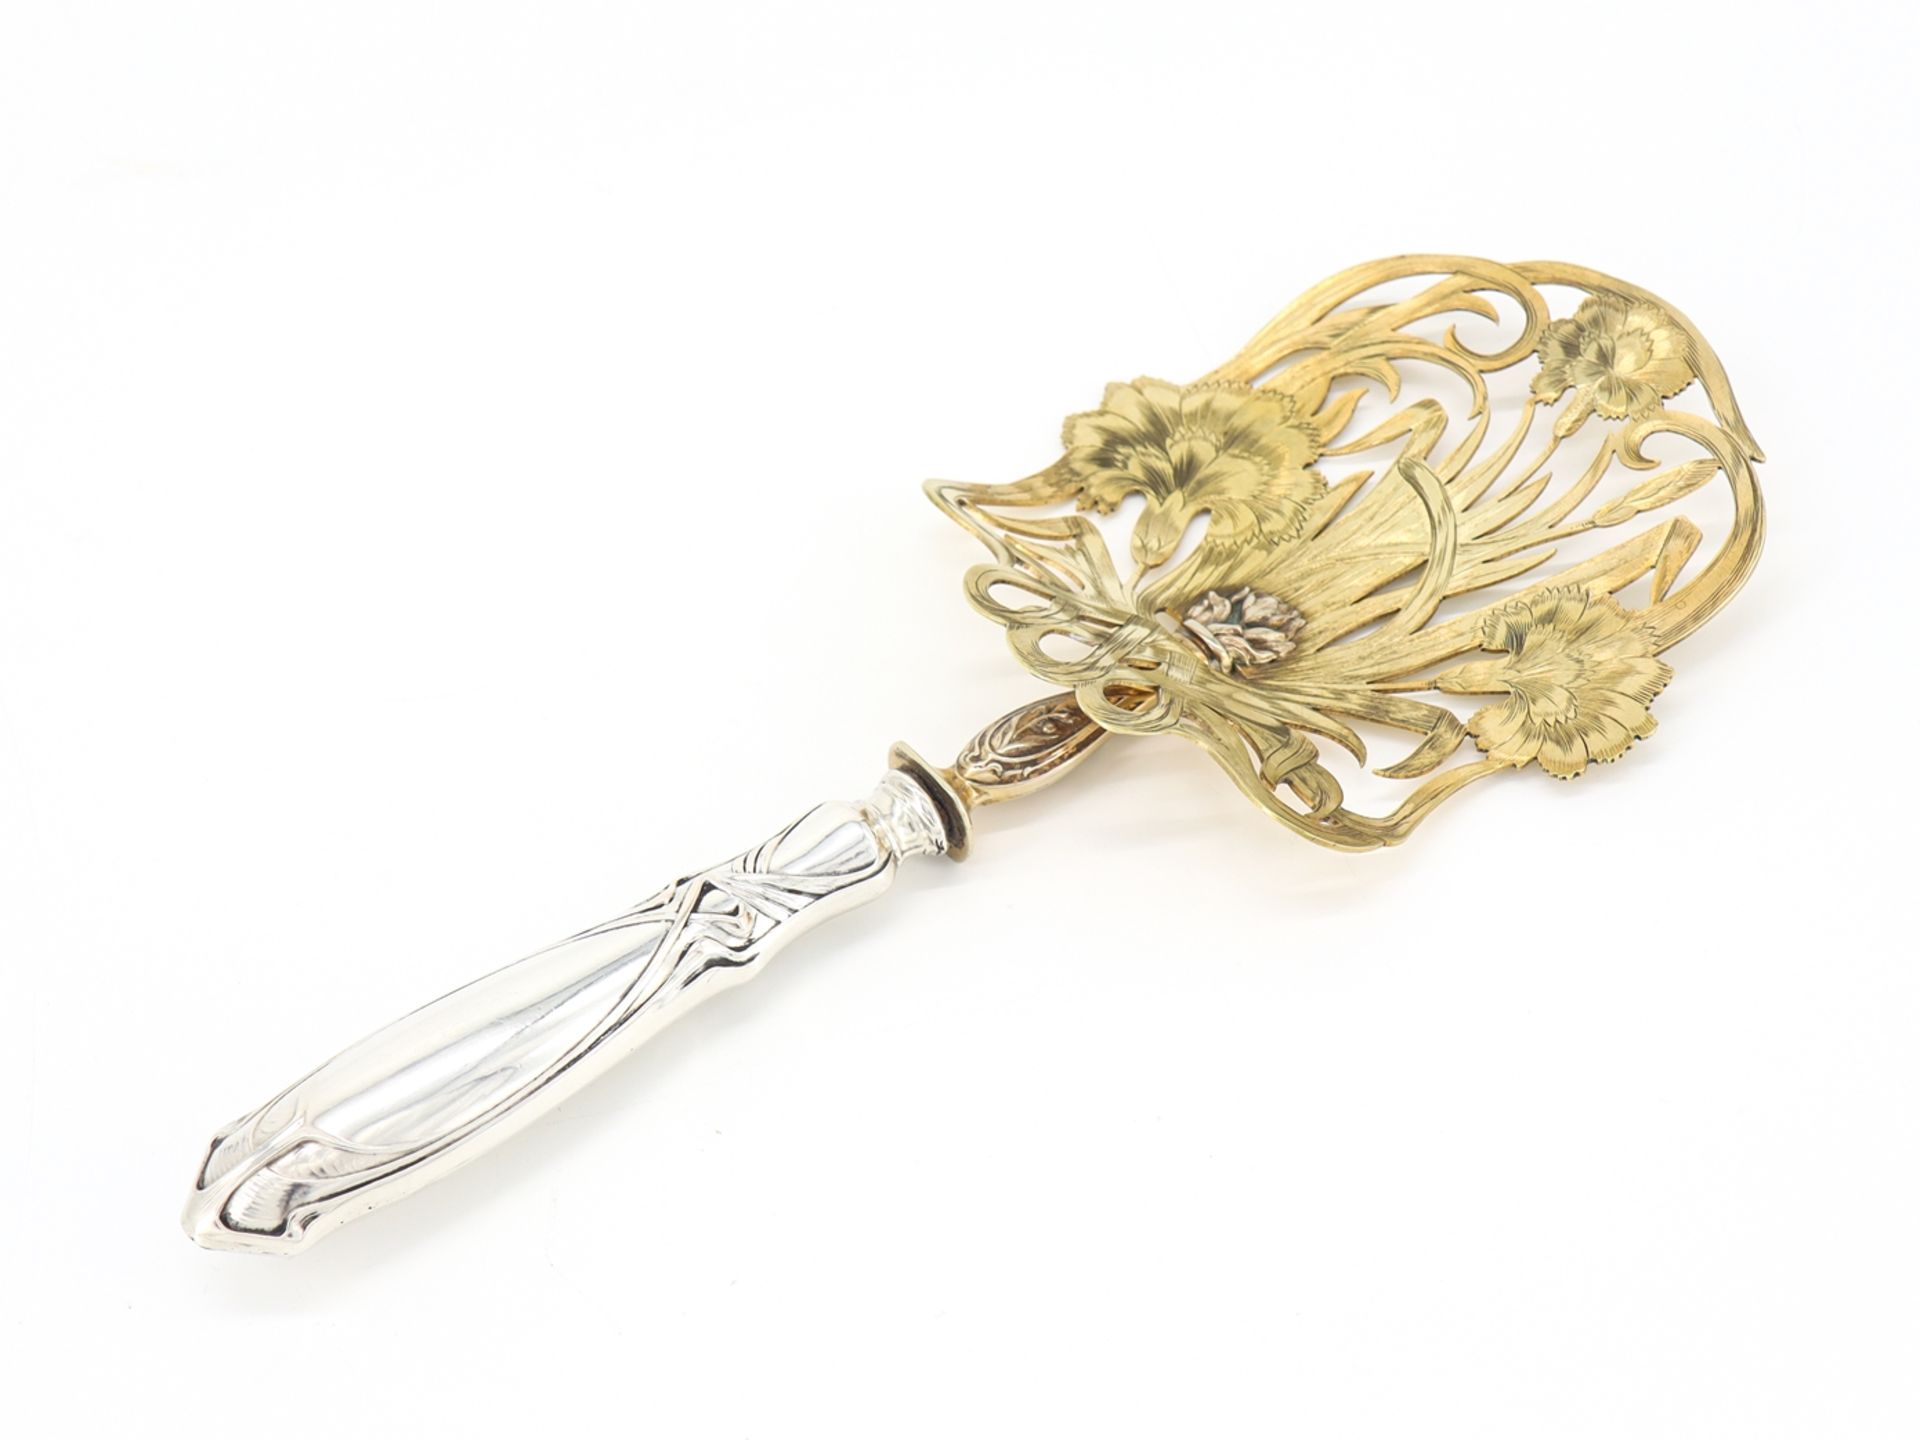 Magnificent Art Nouveau Asparagus Lifter in 800 Silver, Gilded around 1900 - Image 3 of 6